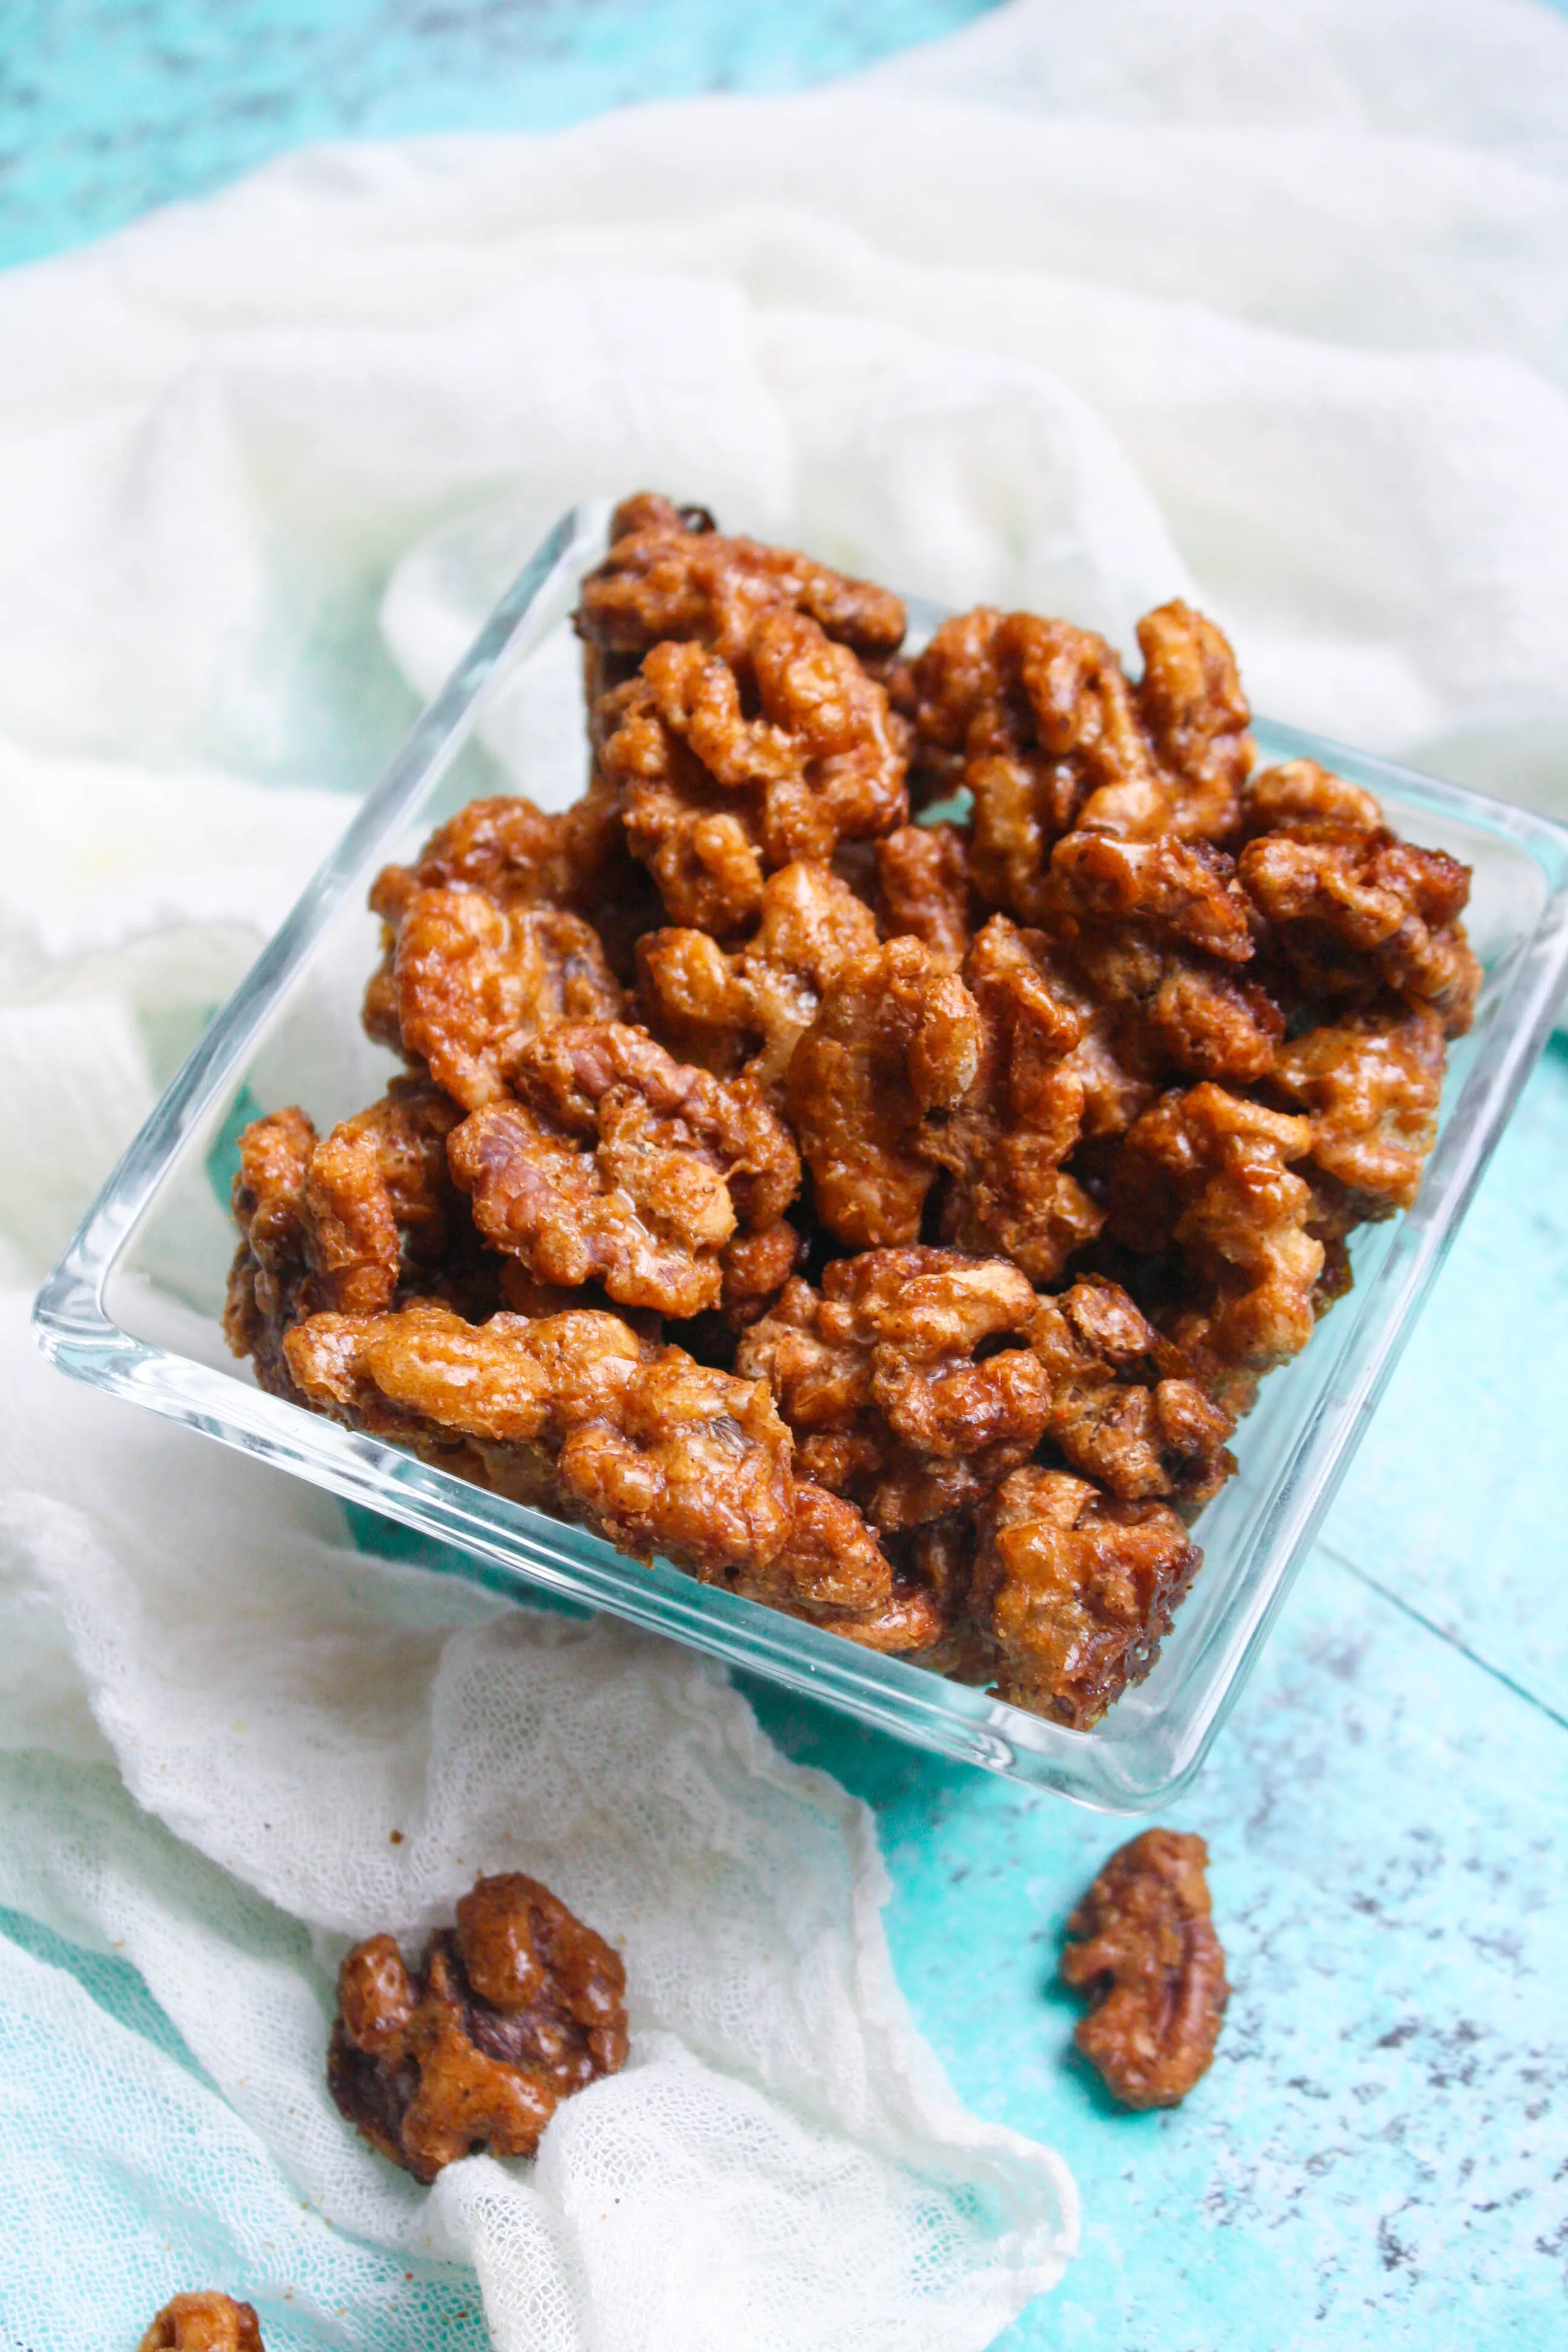 Sweet, Spicy & Smoky Candied Walnuts are a fabulous holiday treat. You'll love these candied walnuts tossed with a salad, or just for snacking on!